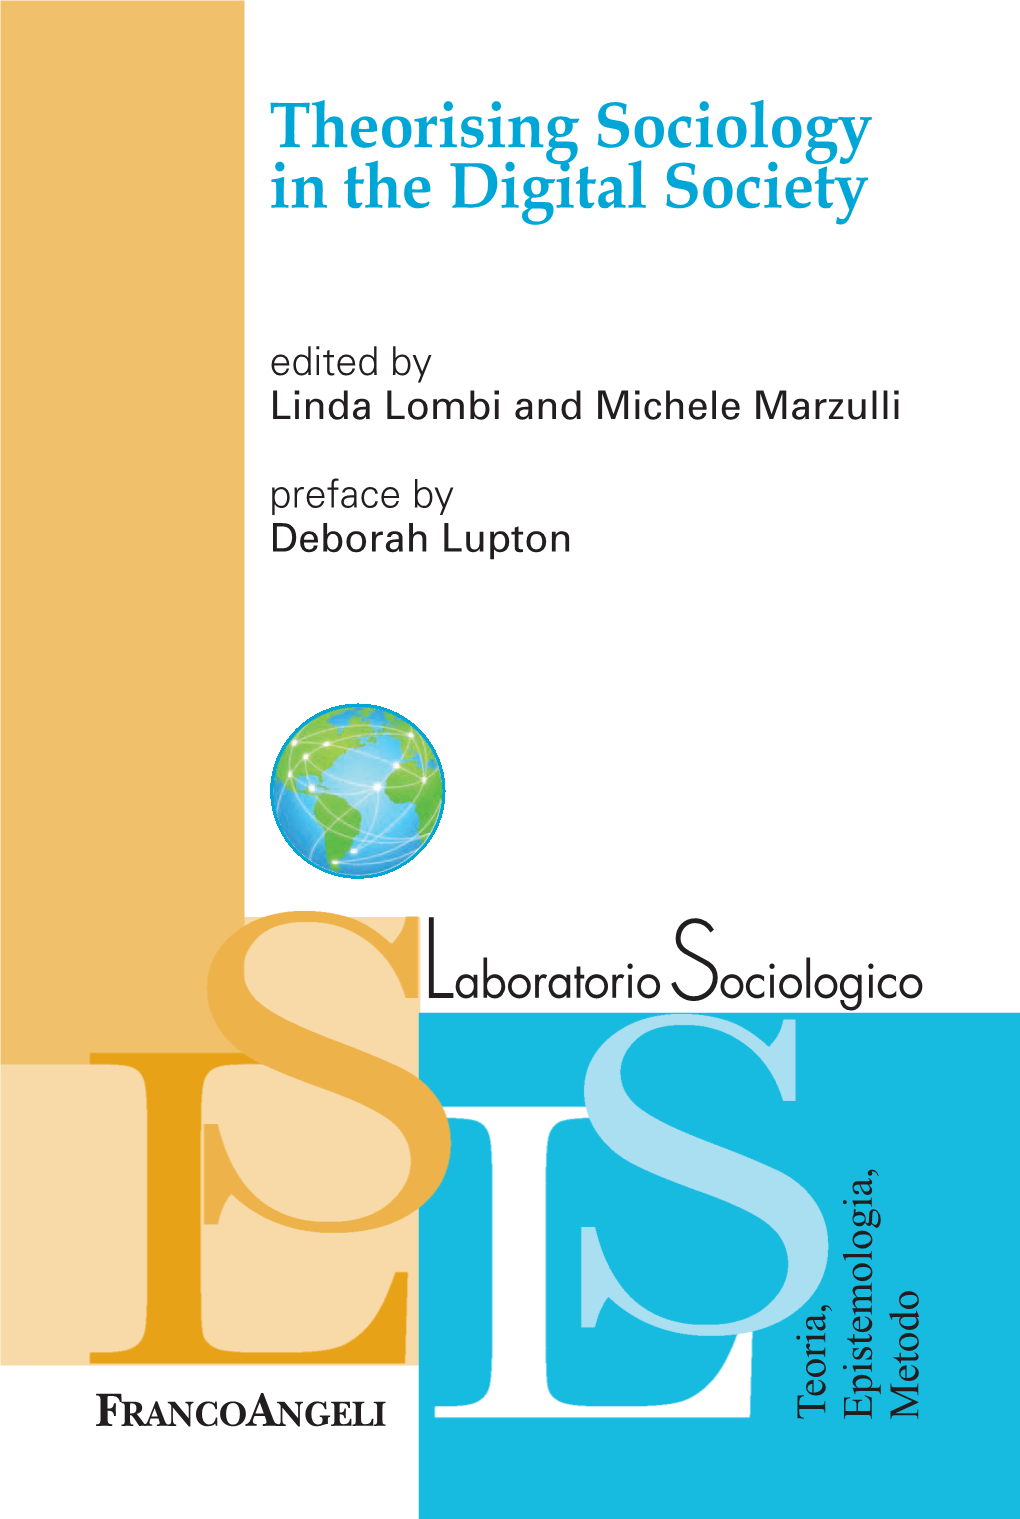 Theorising Sociology in the Digital Society Edited by Linda Lombi and Michele Marzulli Preface by Deborah Lupton